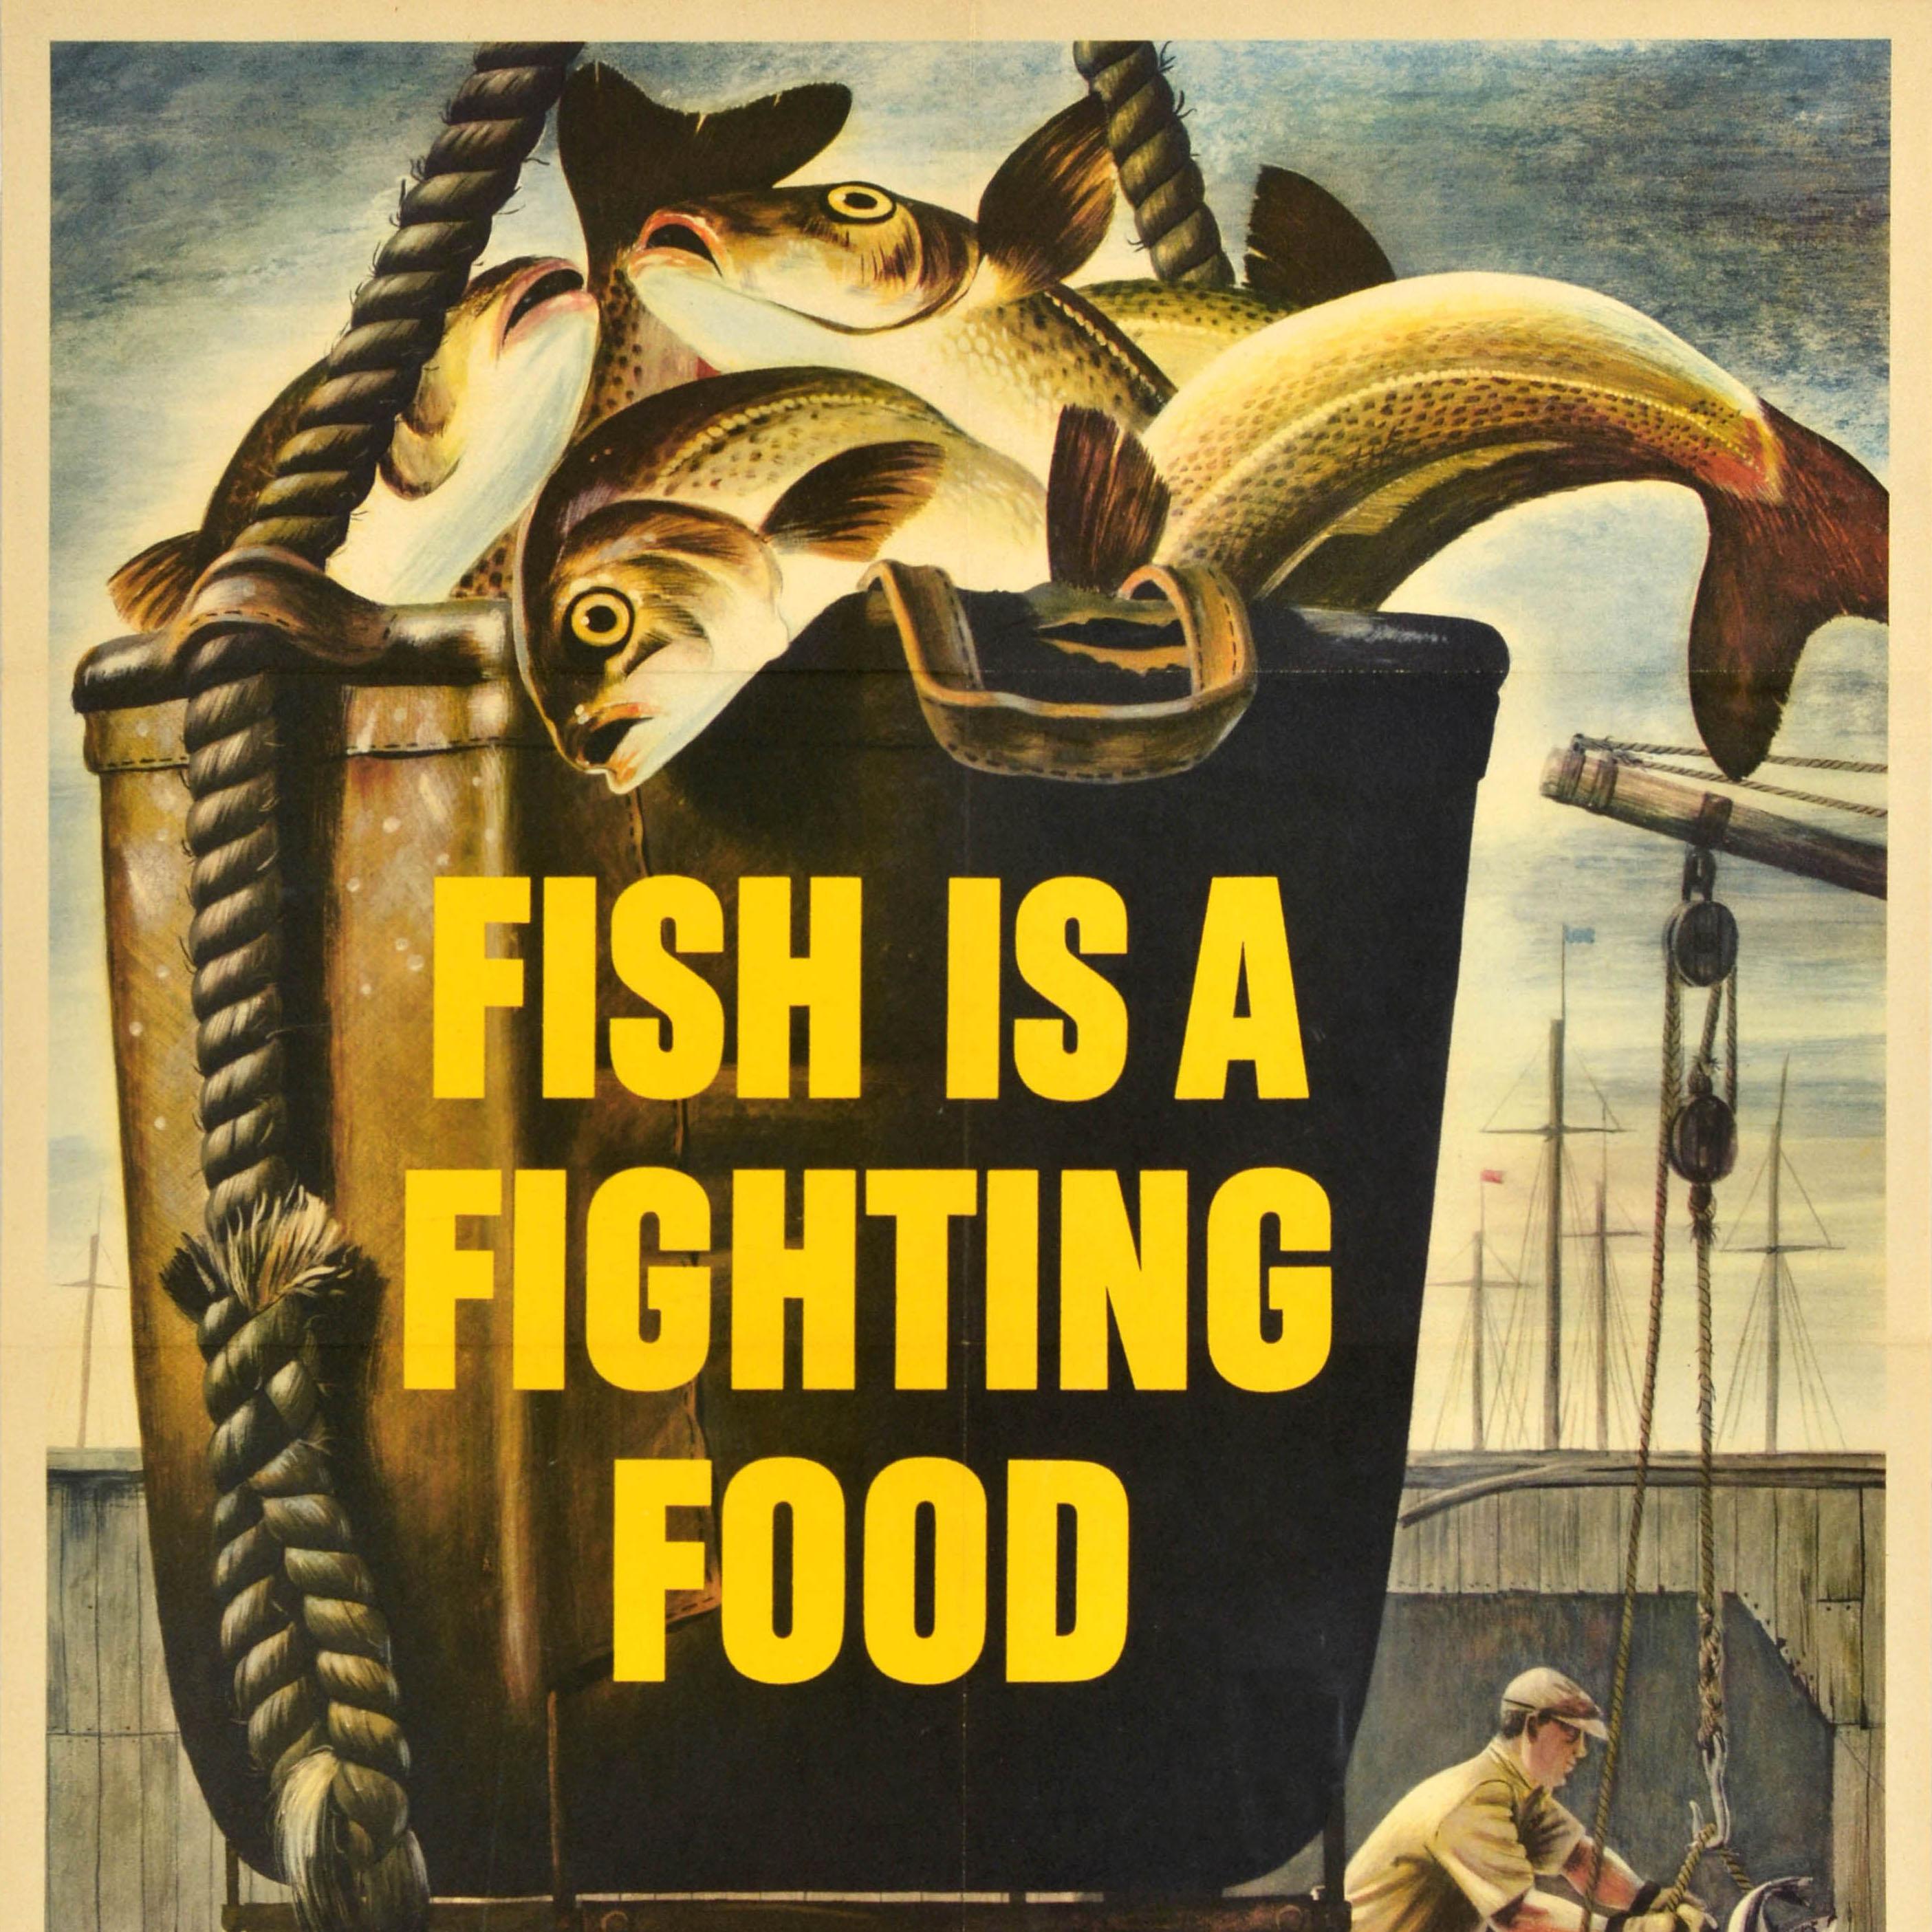 Original vintage World War Two home front poster - Fish is a fighting food We need more - featuring an image of a catch of fish being hauled in a bucket by fishermen working on a wooden dock with masts visible in the background and the bold title